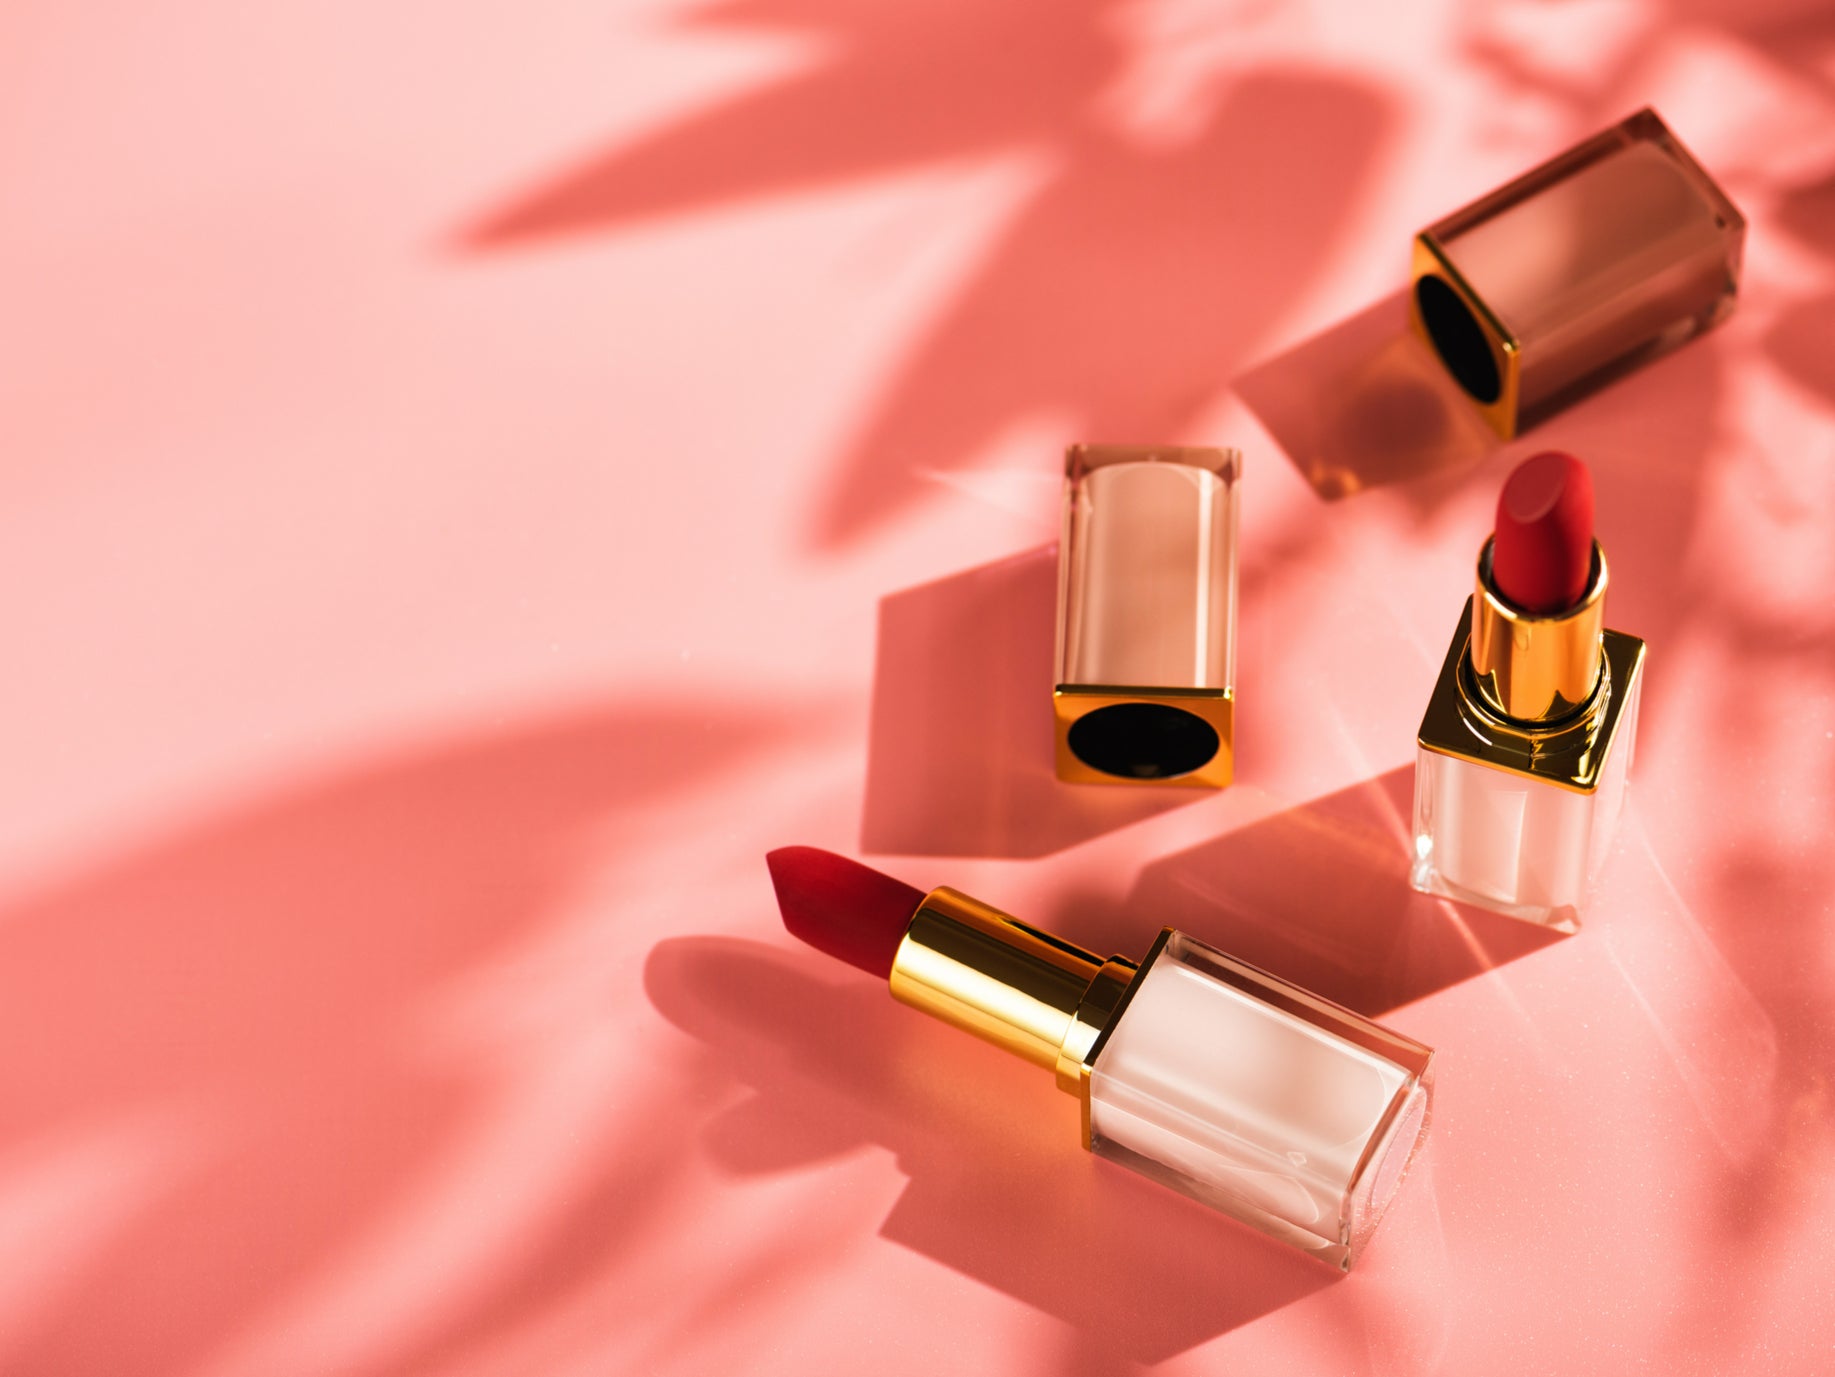 Pucker up: Do luxury purchases like designer lipstick get a boost during times of economic turbulence?